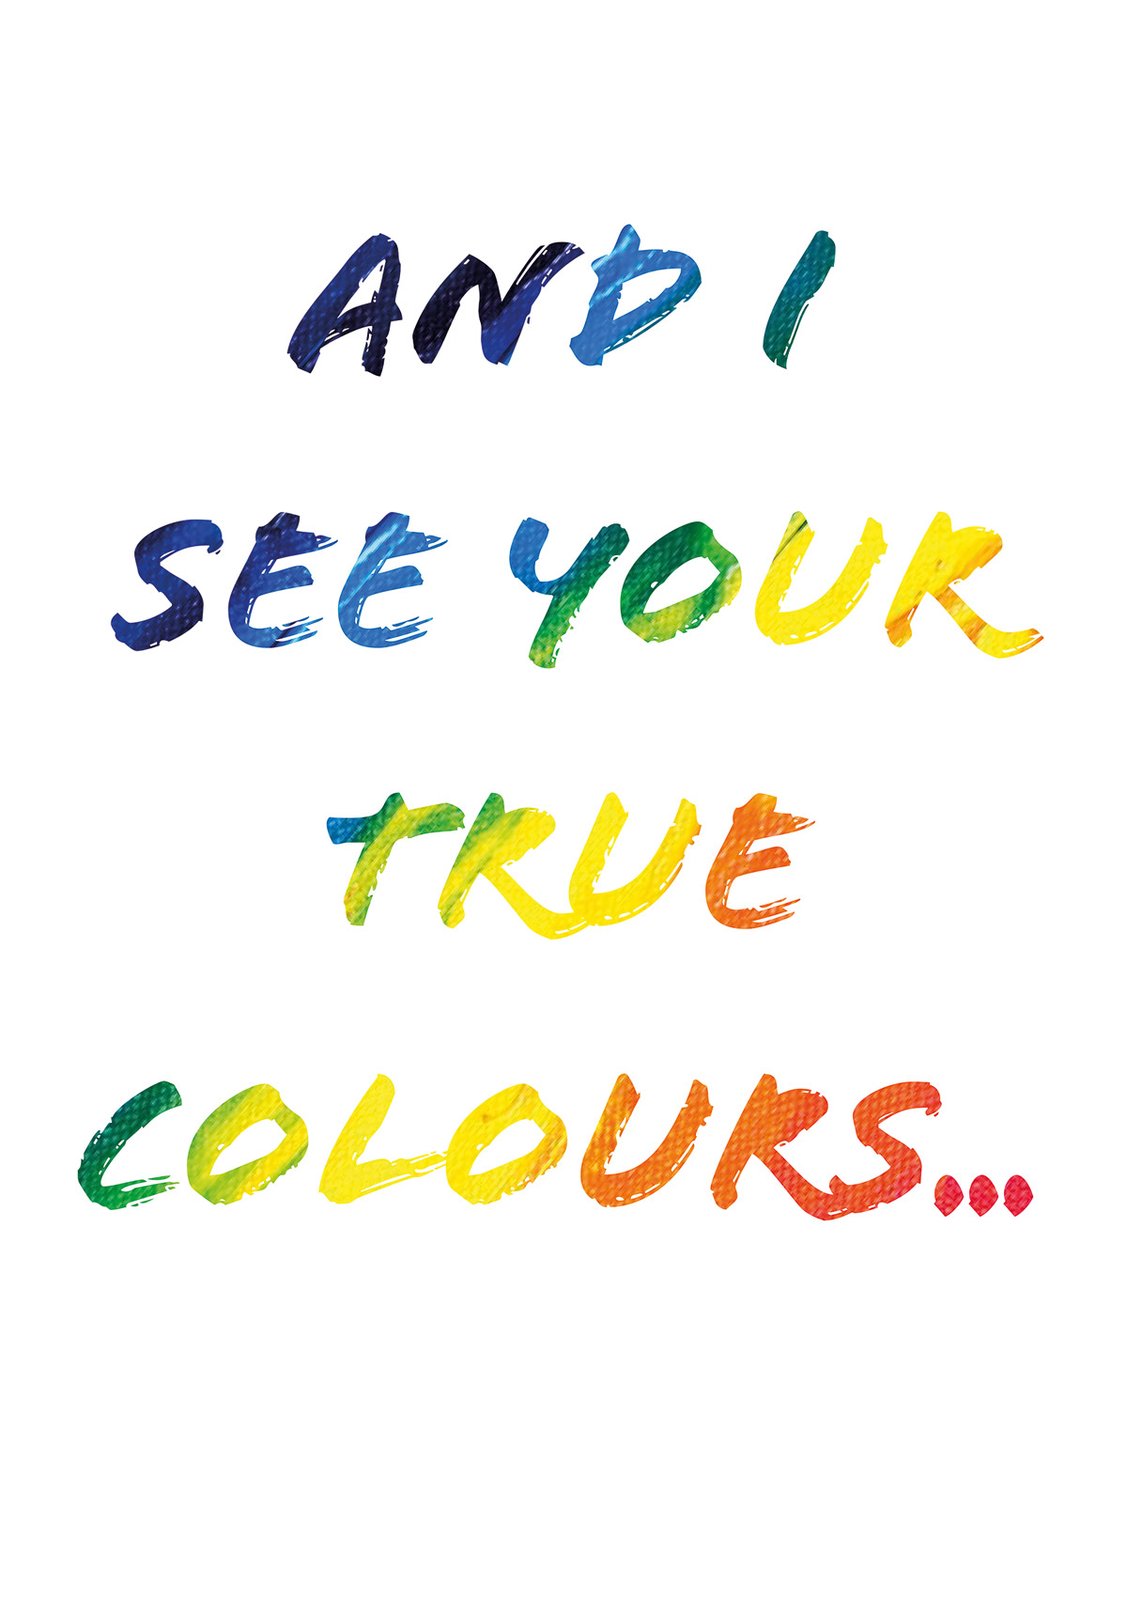 i see your true colors